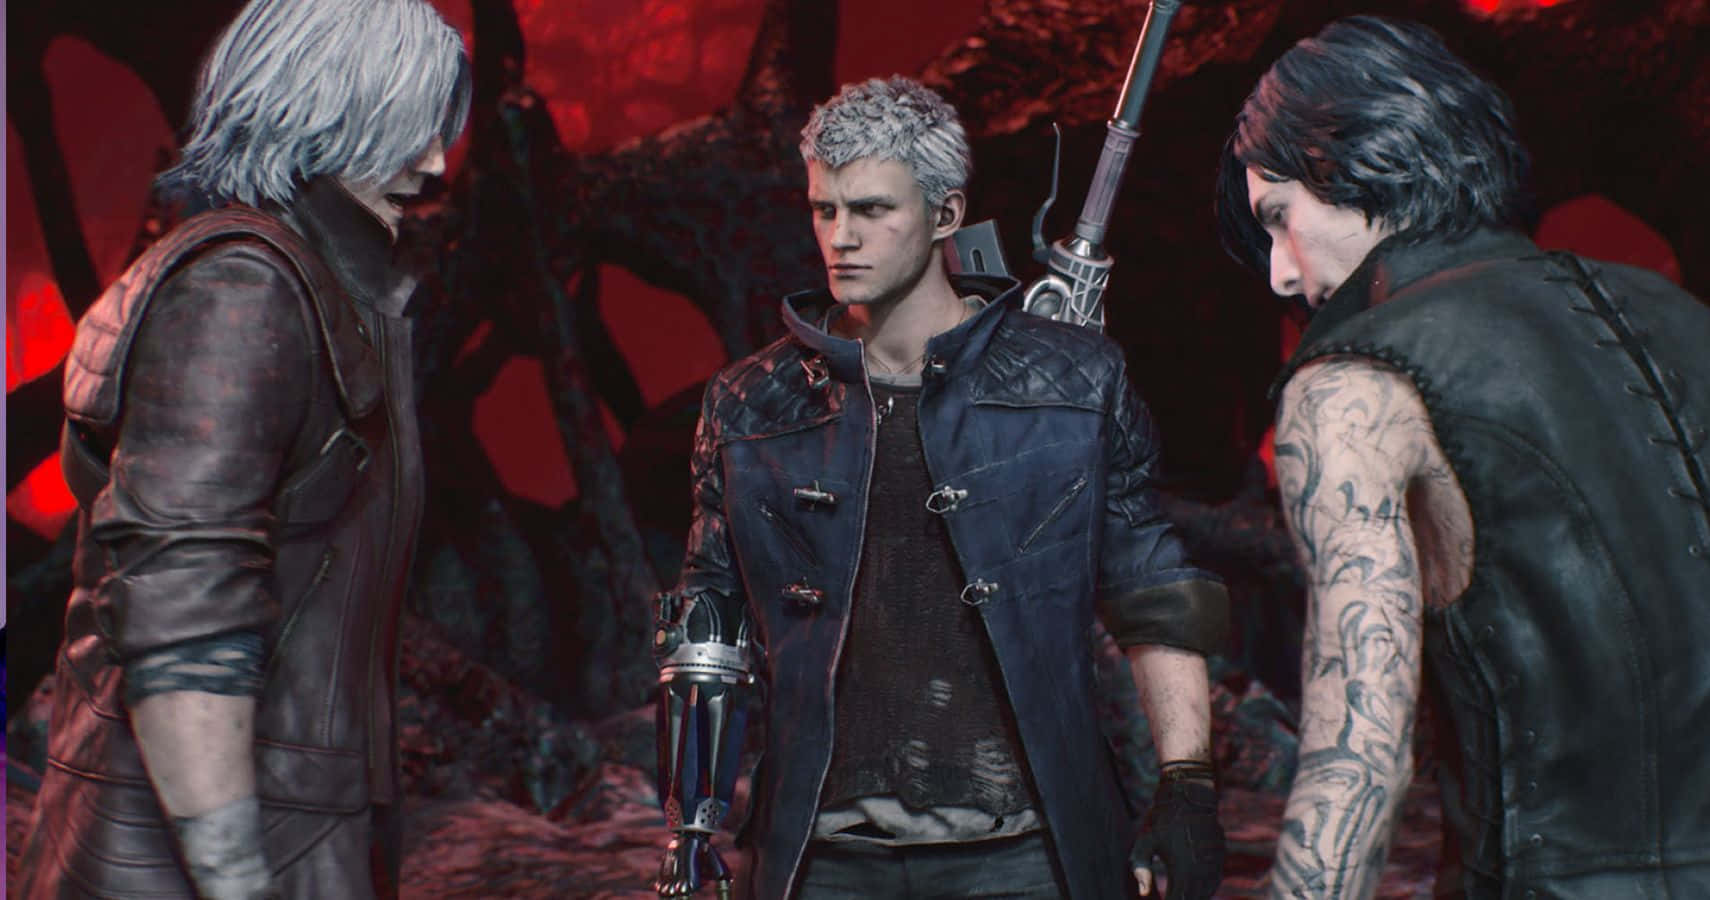 Iconic Devil May Cry Characters in Action Wallpaper